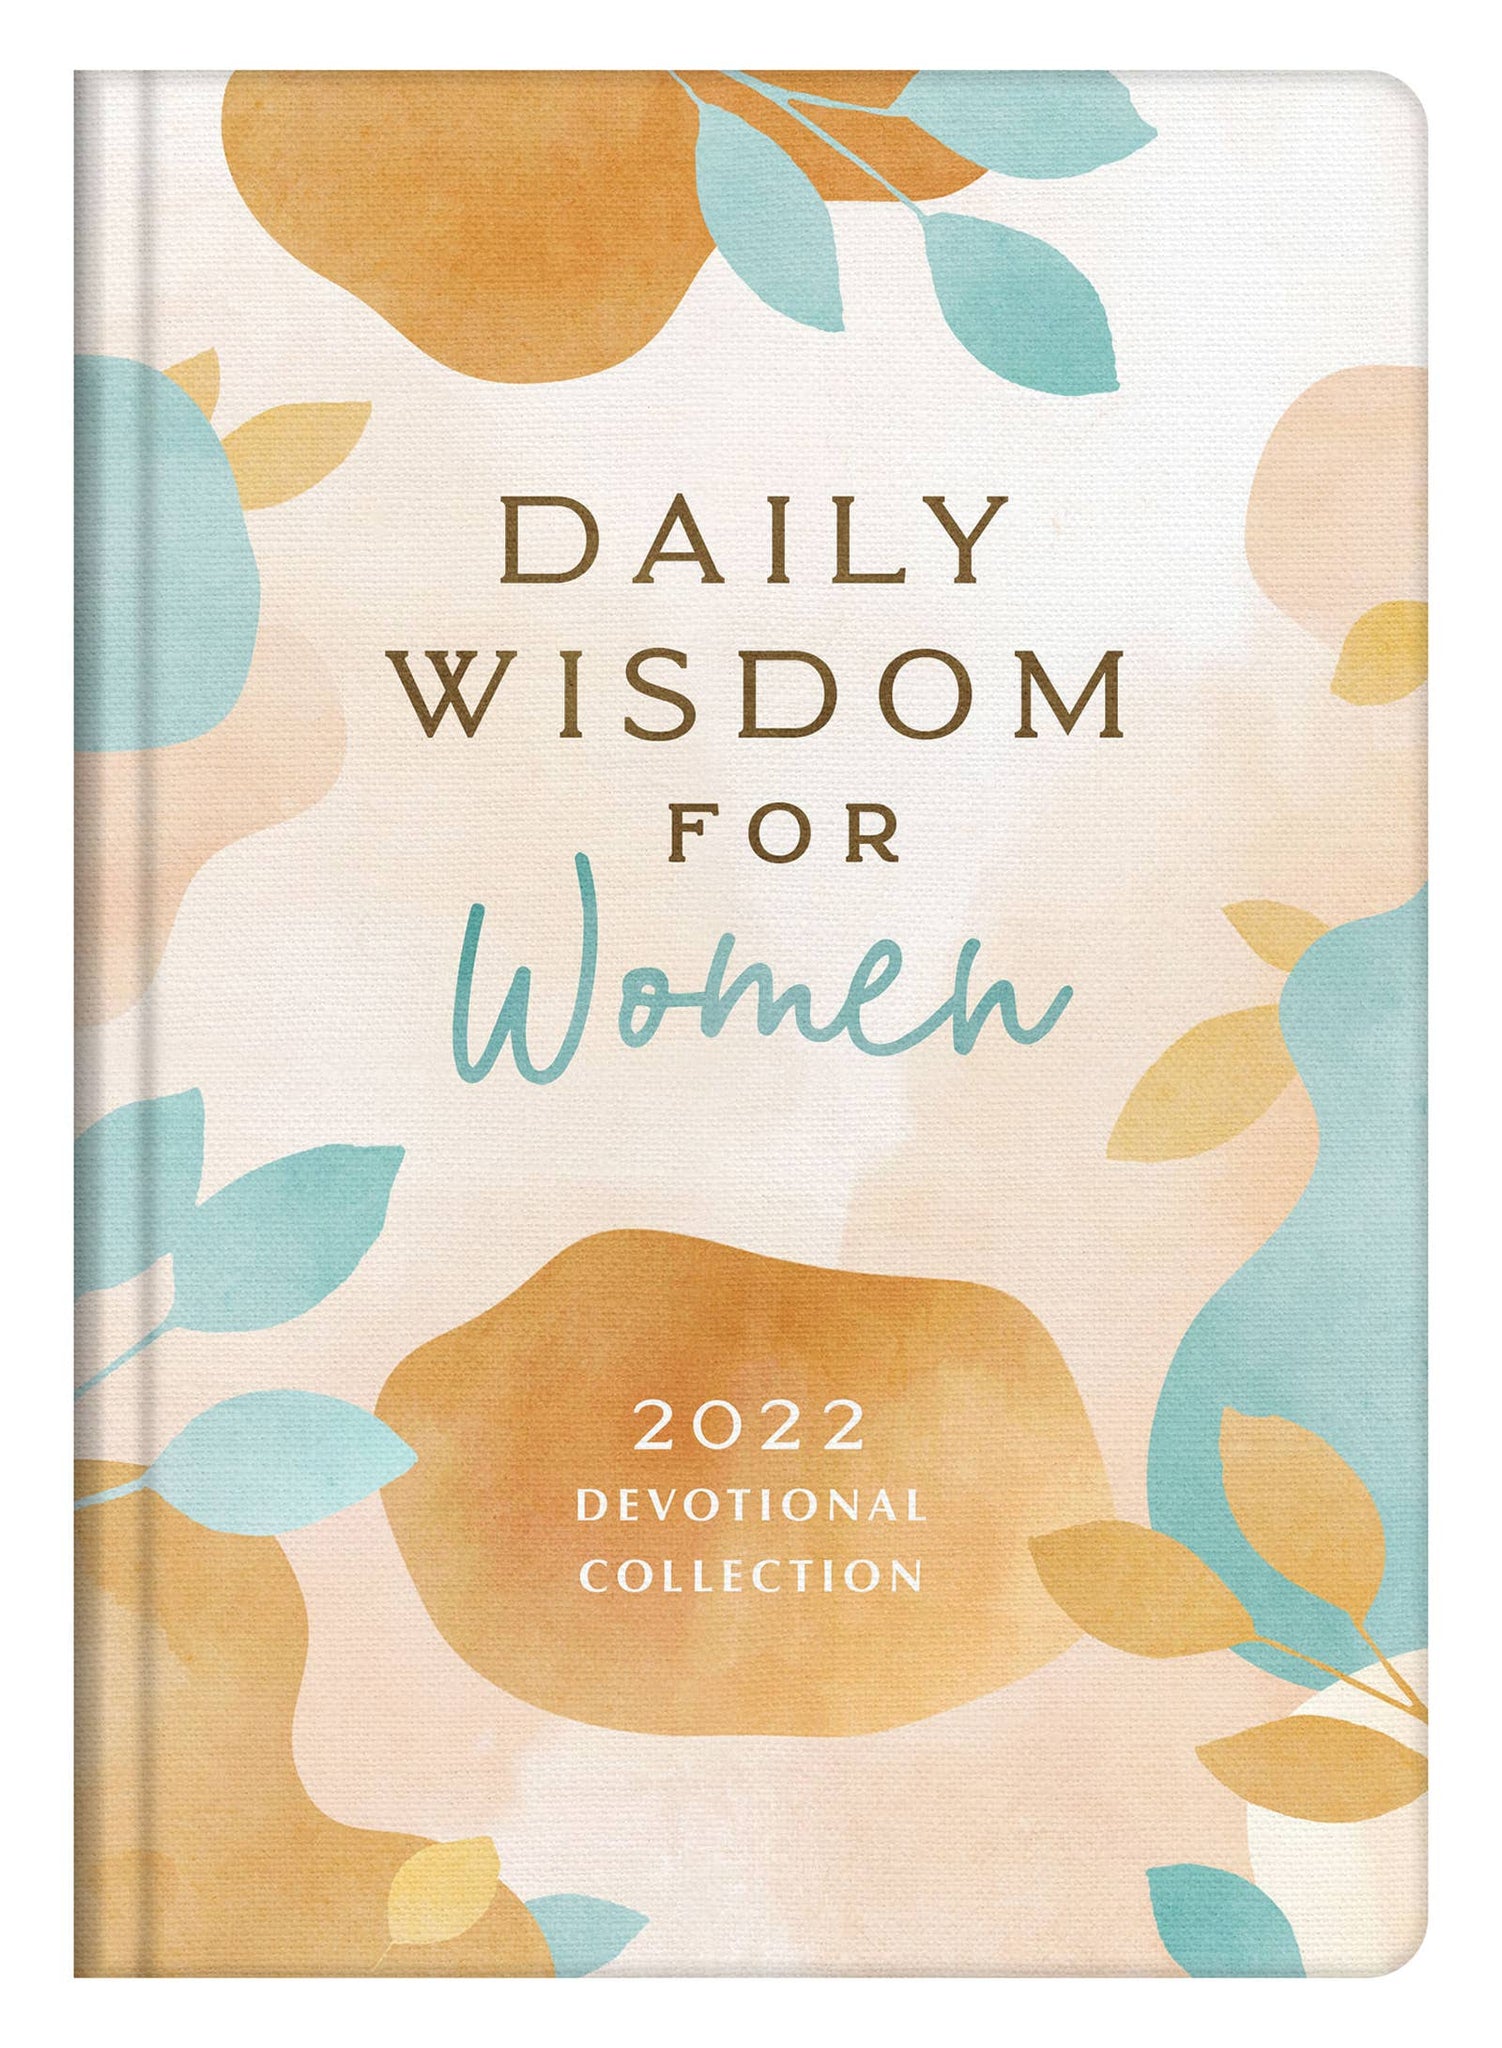 Daily Wisdom for Women 2022 Devotional Collection